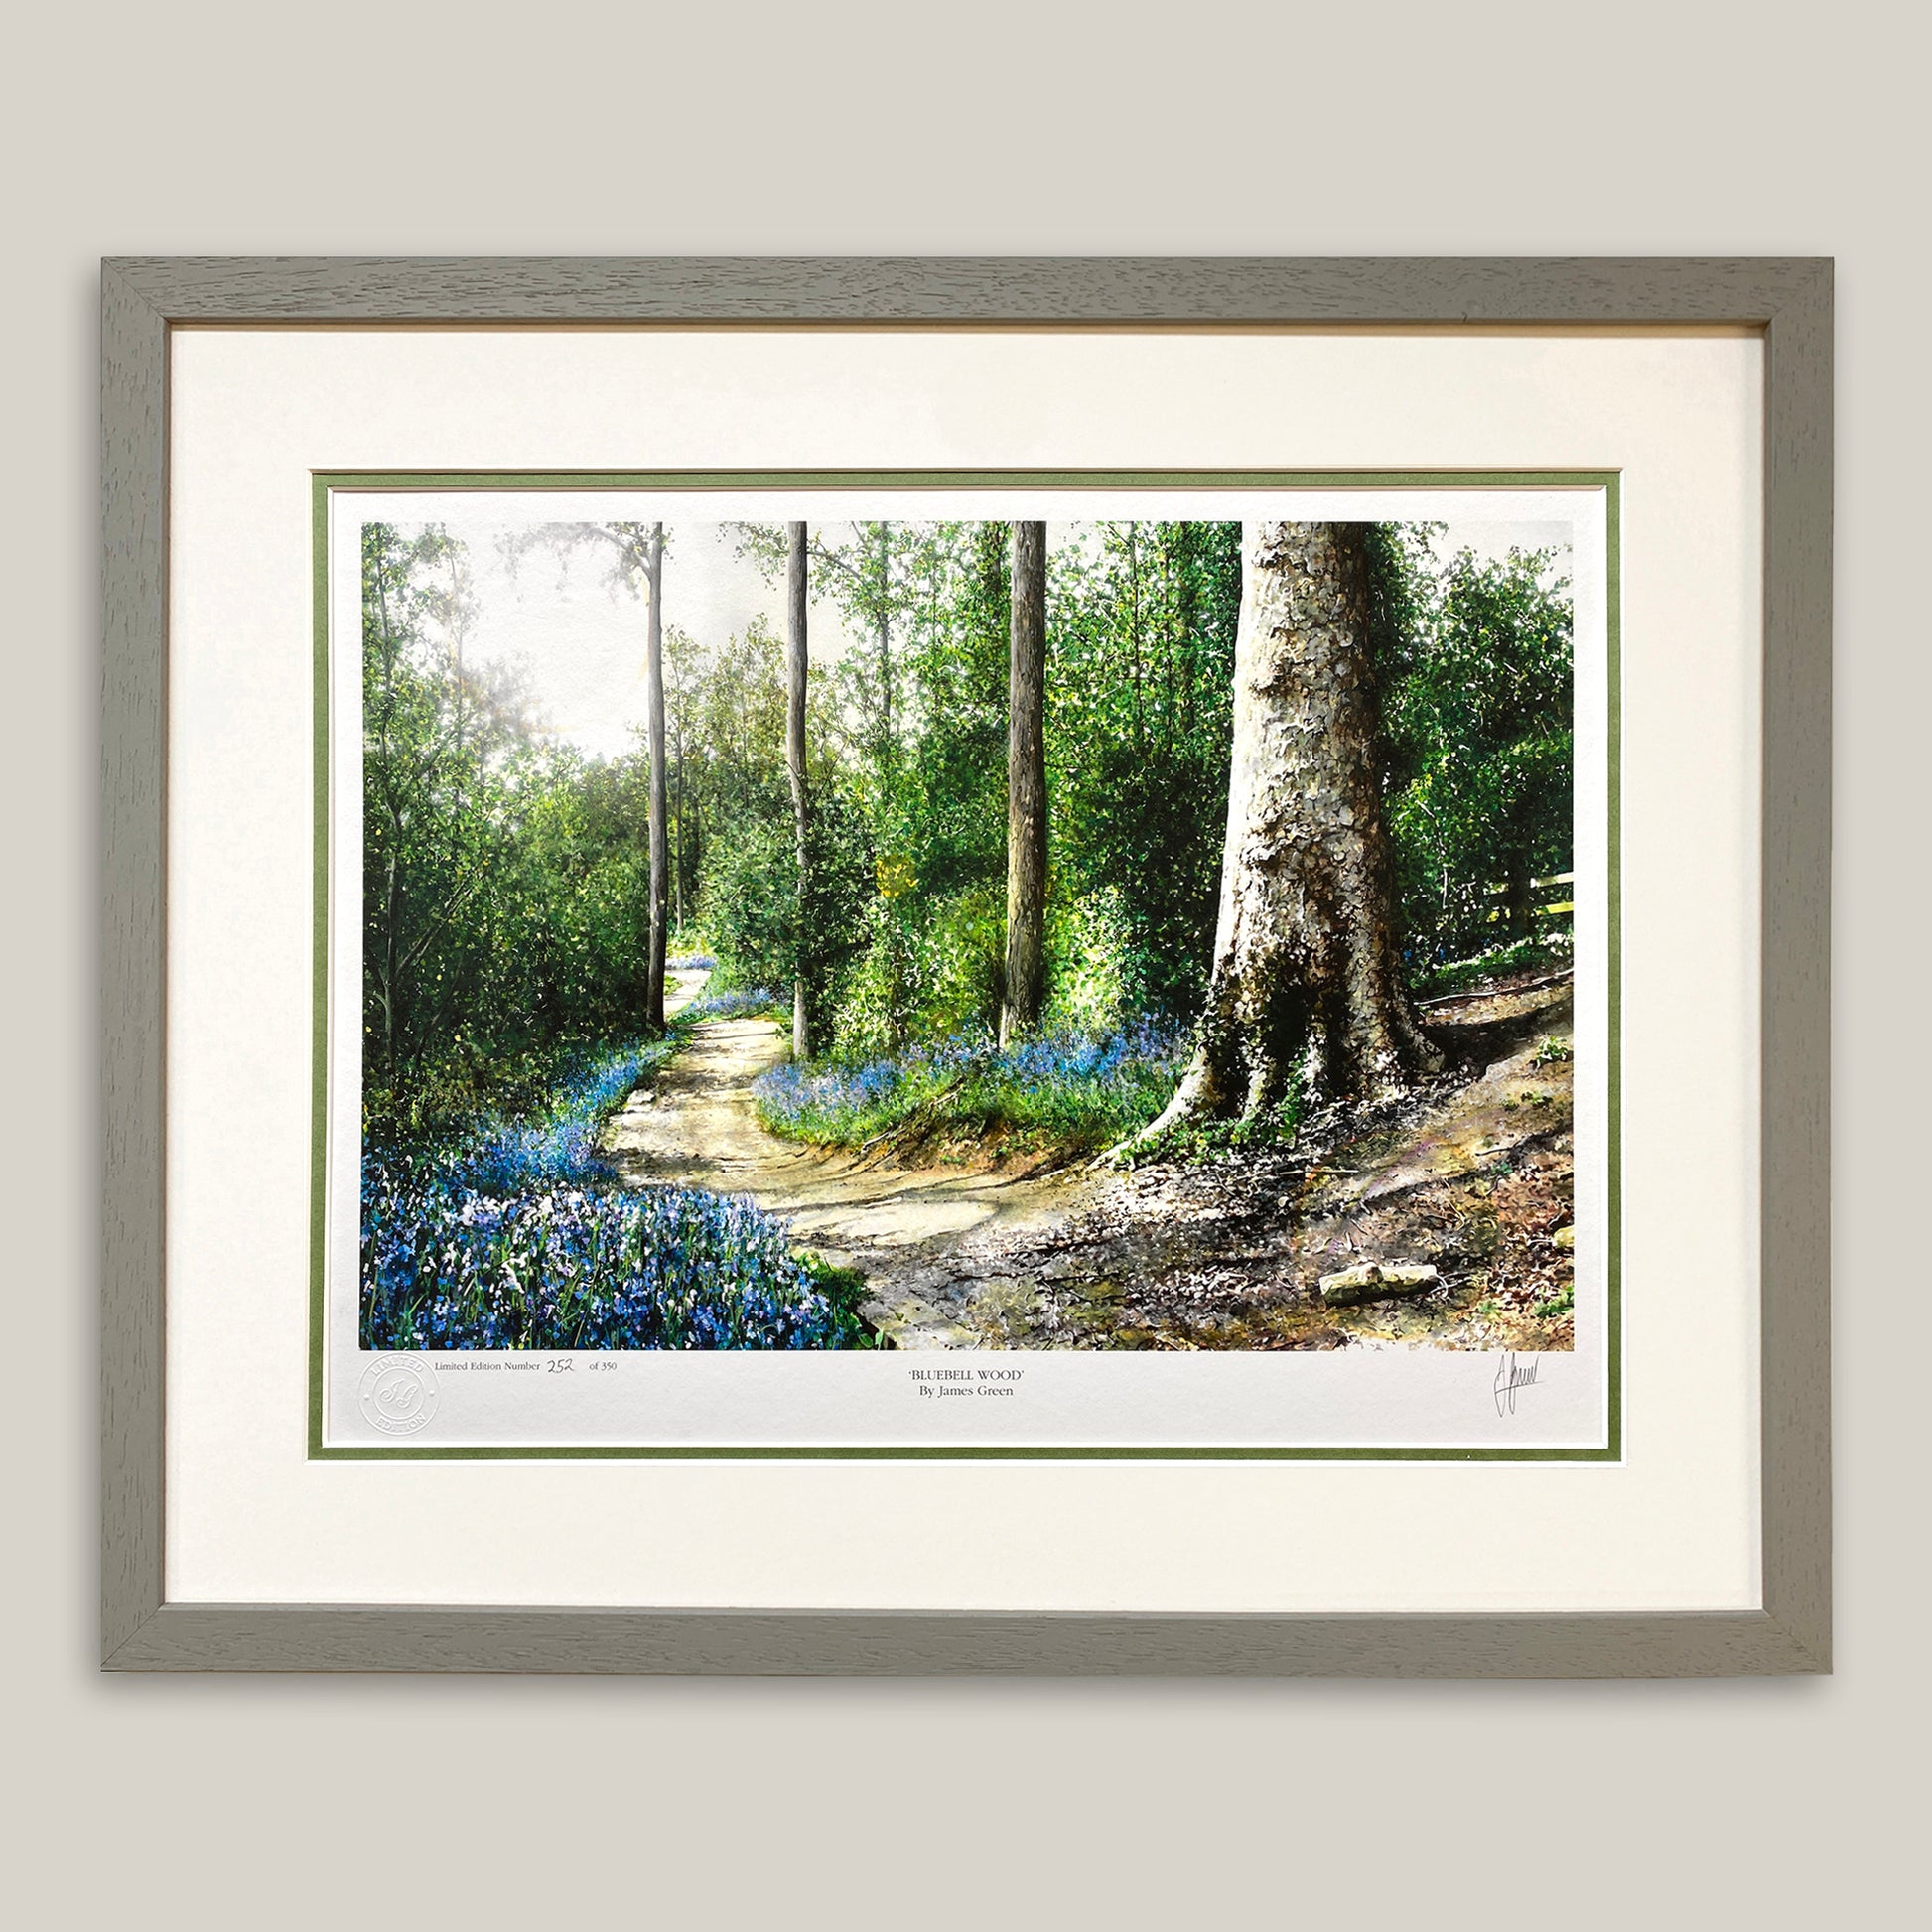 bluebell wood painting framed in a light grey moulding